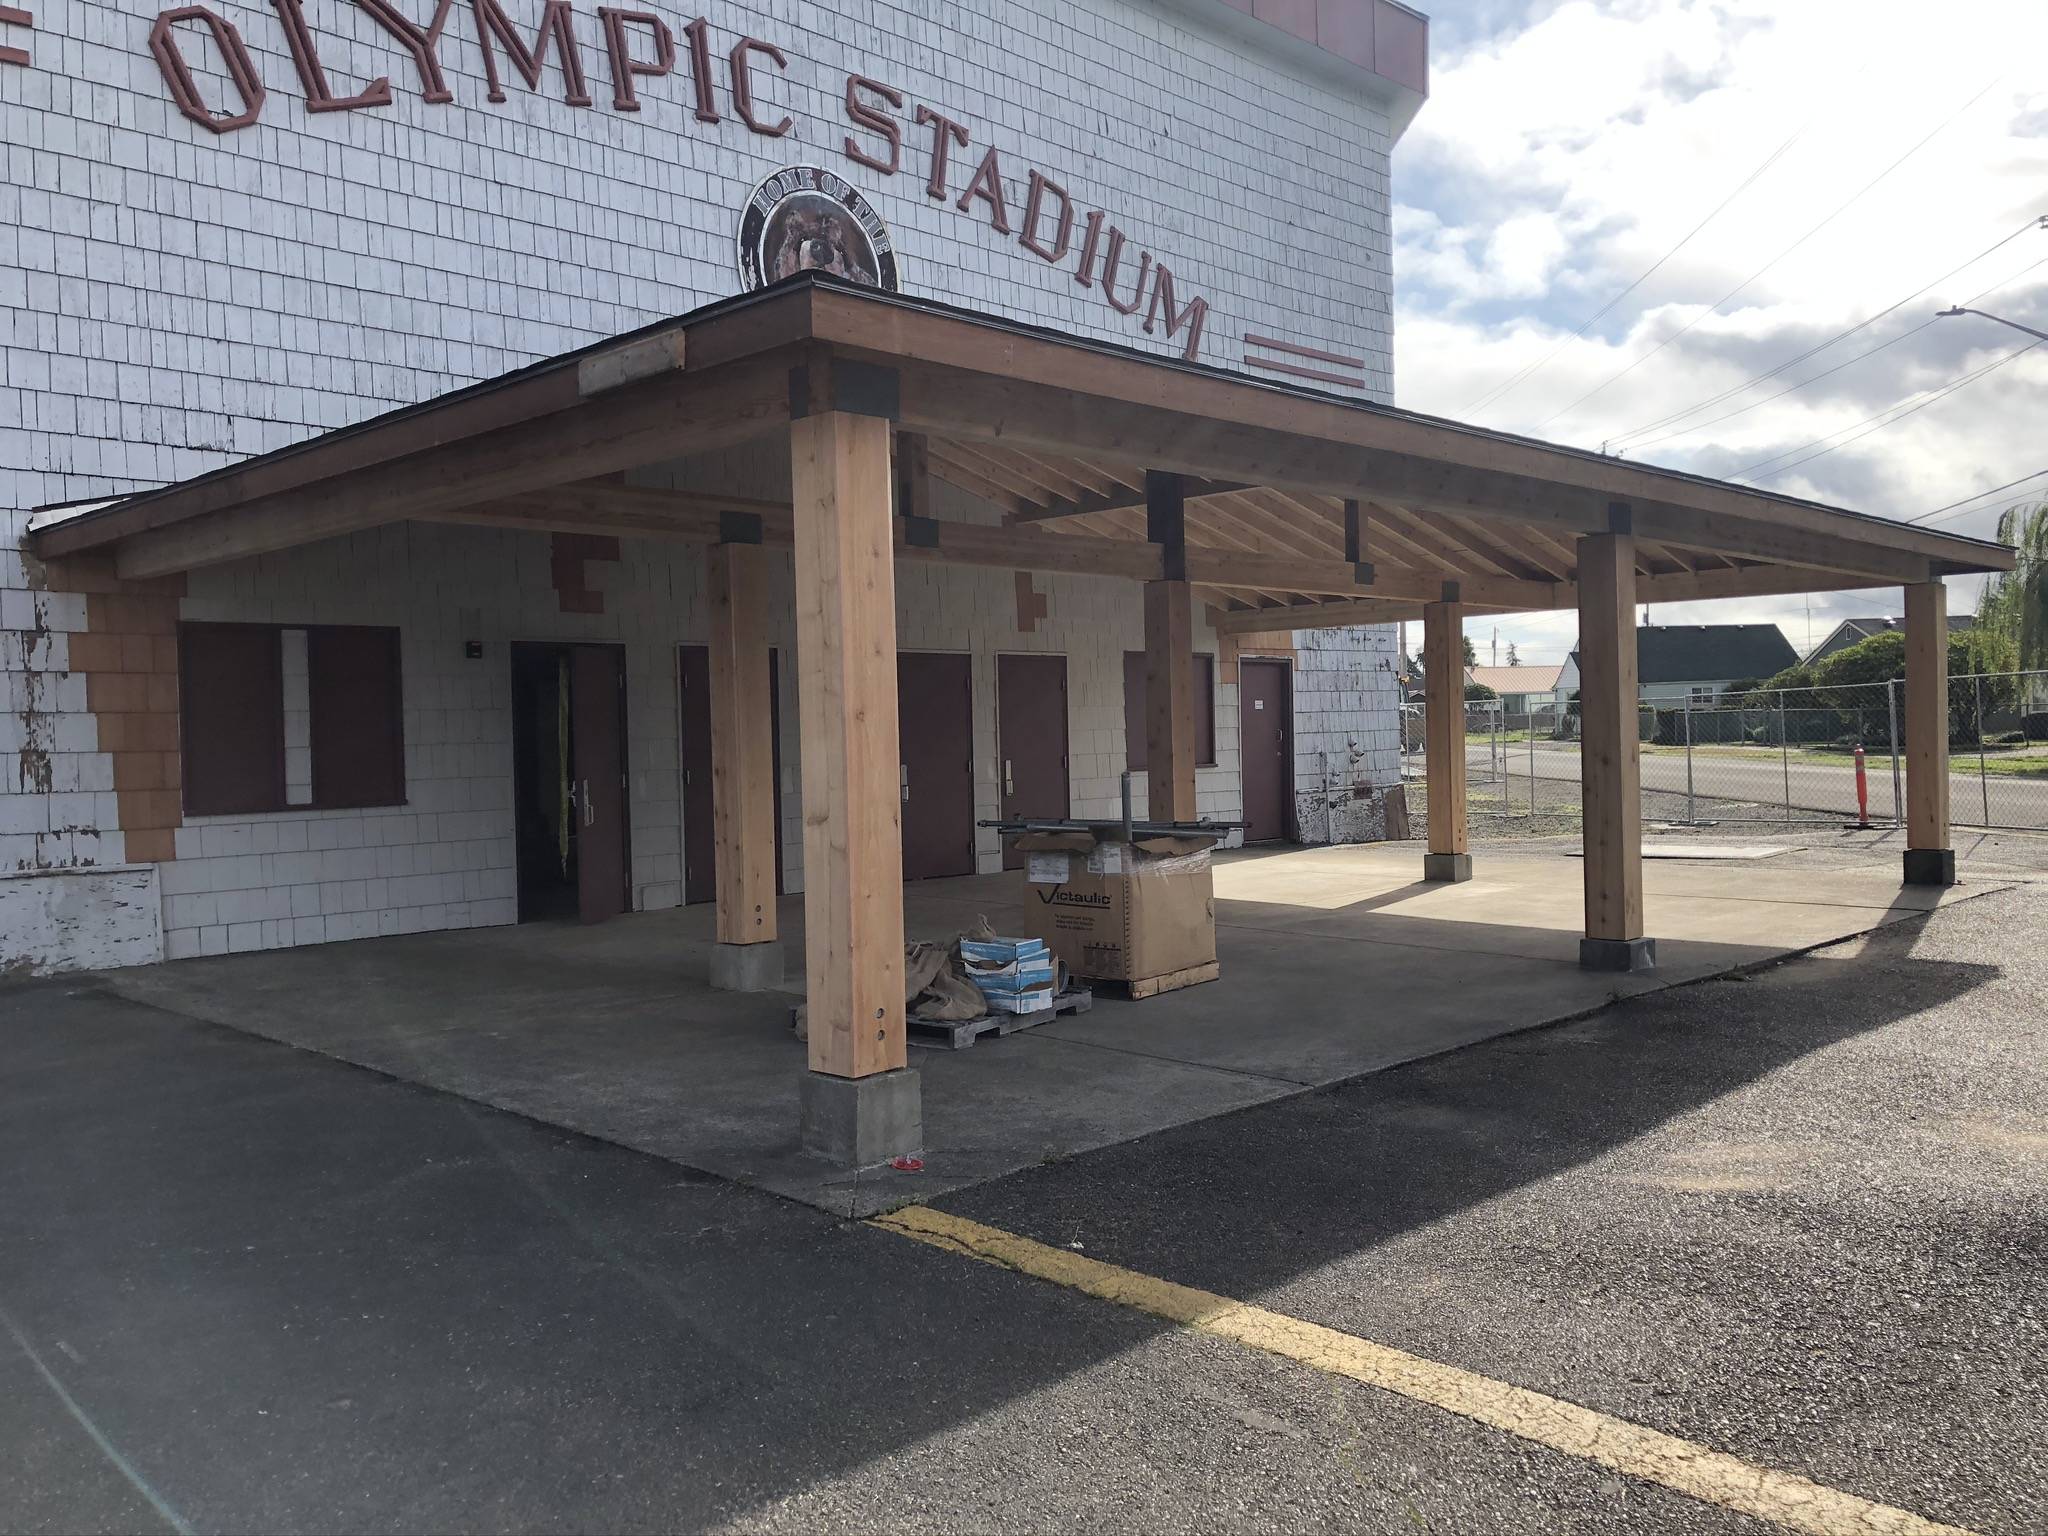 Brian Shay photo 
The multi-phase renovation of Olympic Stadium includes a new front entry finished last year, a new fire suppression system under the grandstands and replacement of some doors.